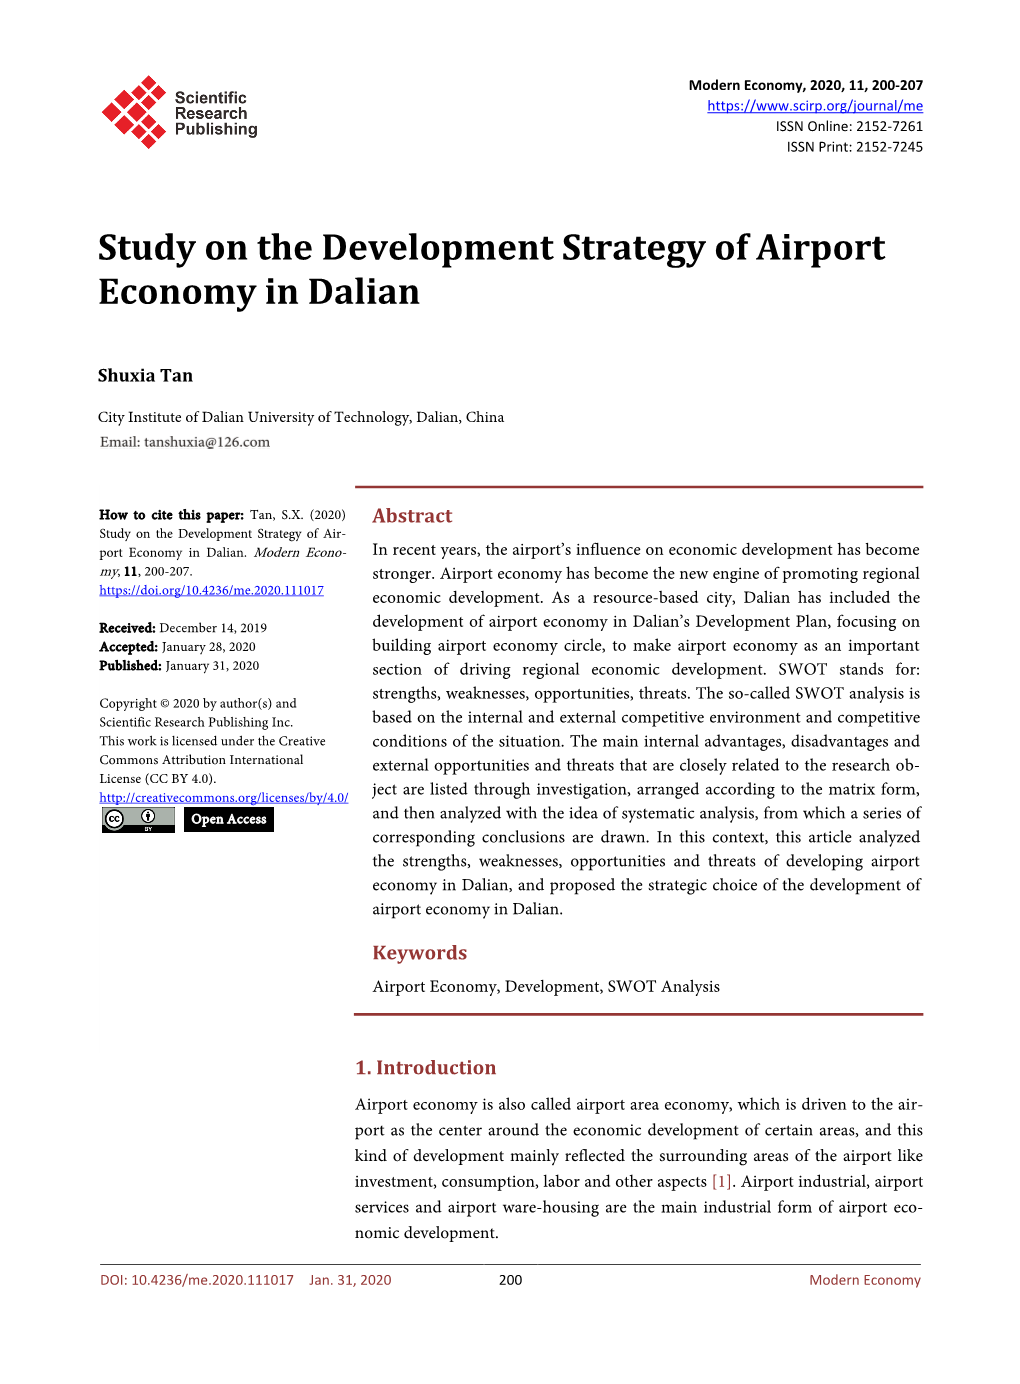 Study on the Development Strategy of Airport Economy in Dalian